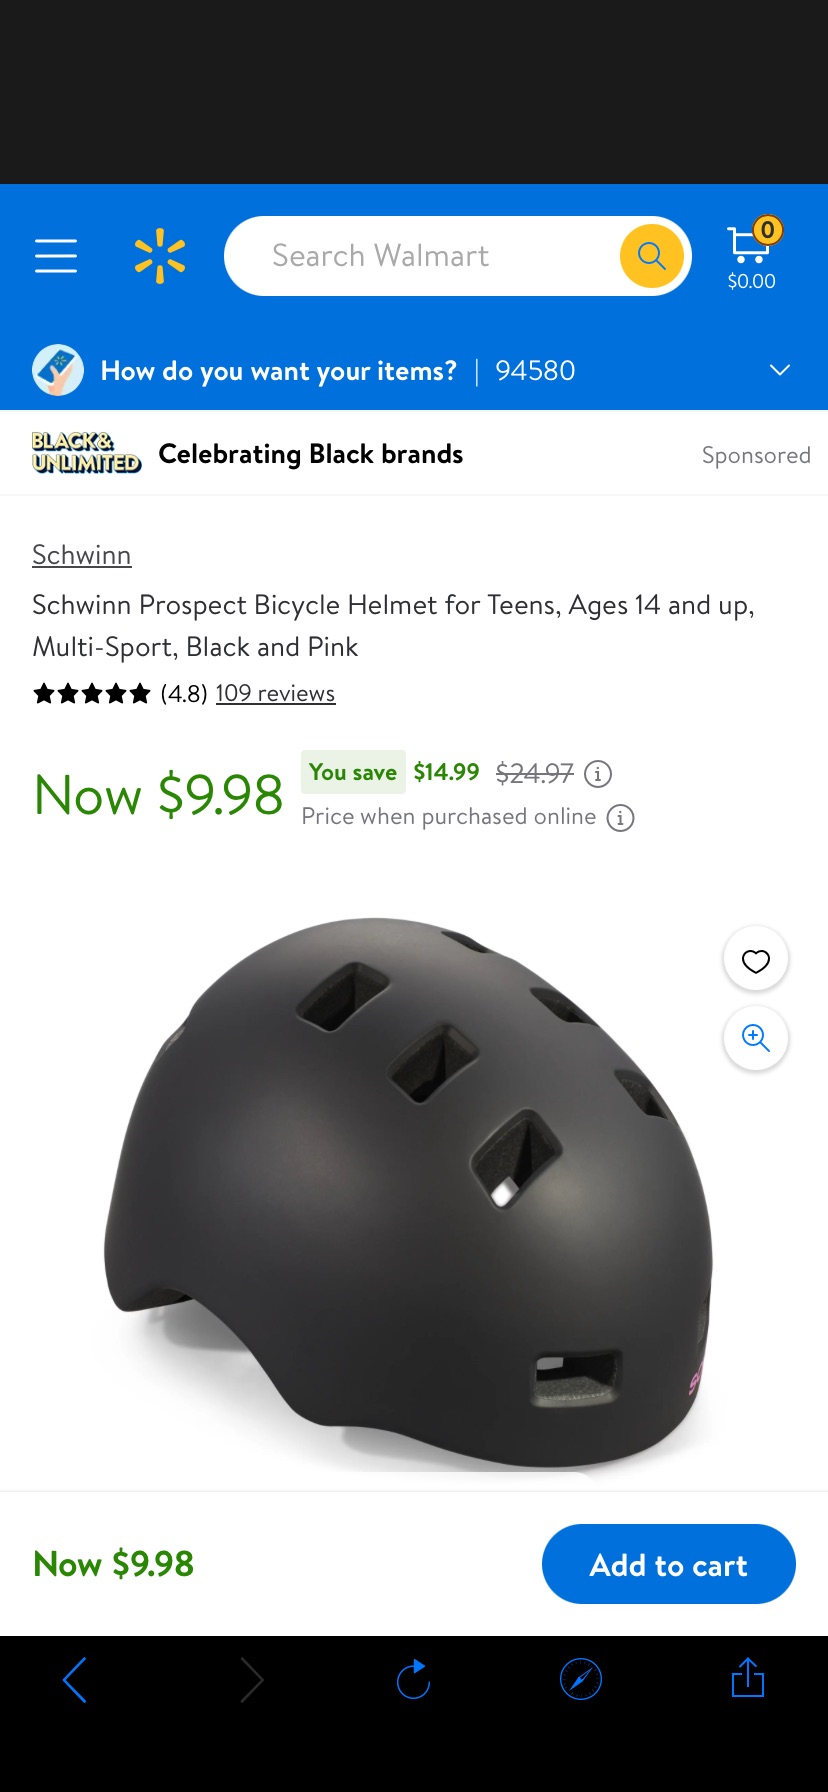 Schwinn Prospect Bicycle Helmet for Teens, Ages 14 and up, Multi-Sport, Black and Pink - Walmart.com